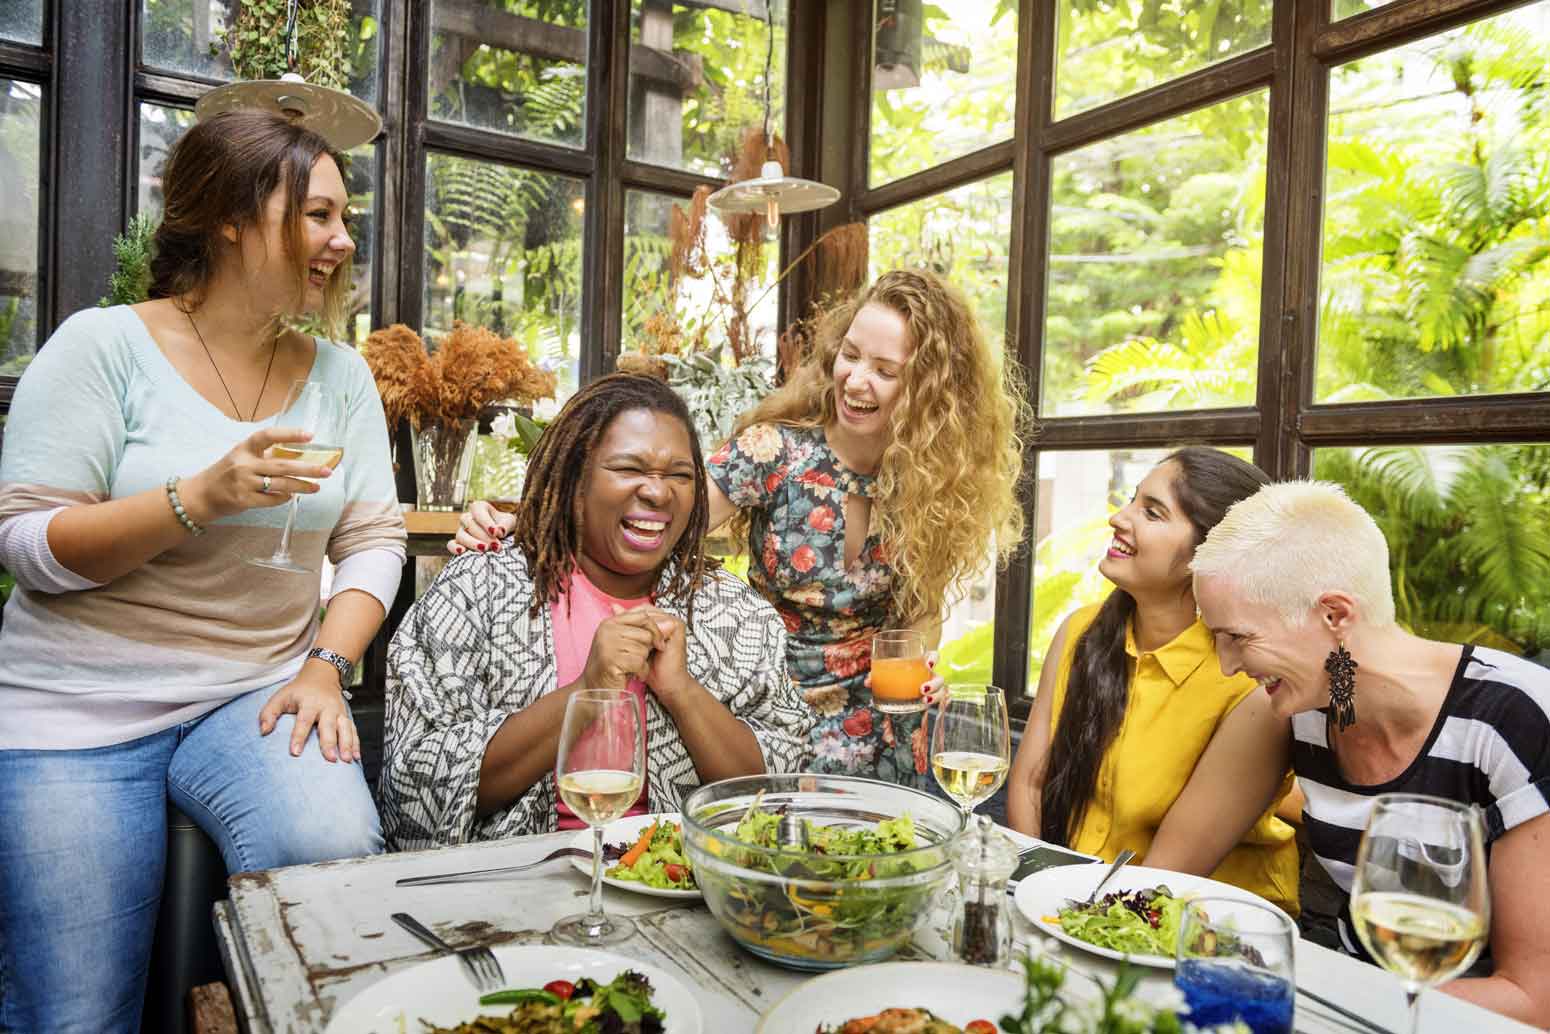 Take Your Friendships to Another Level with a Heartfelt Dinner Party